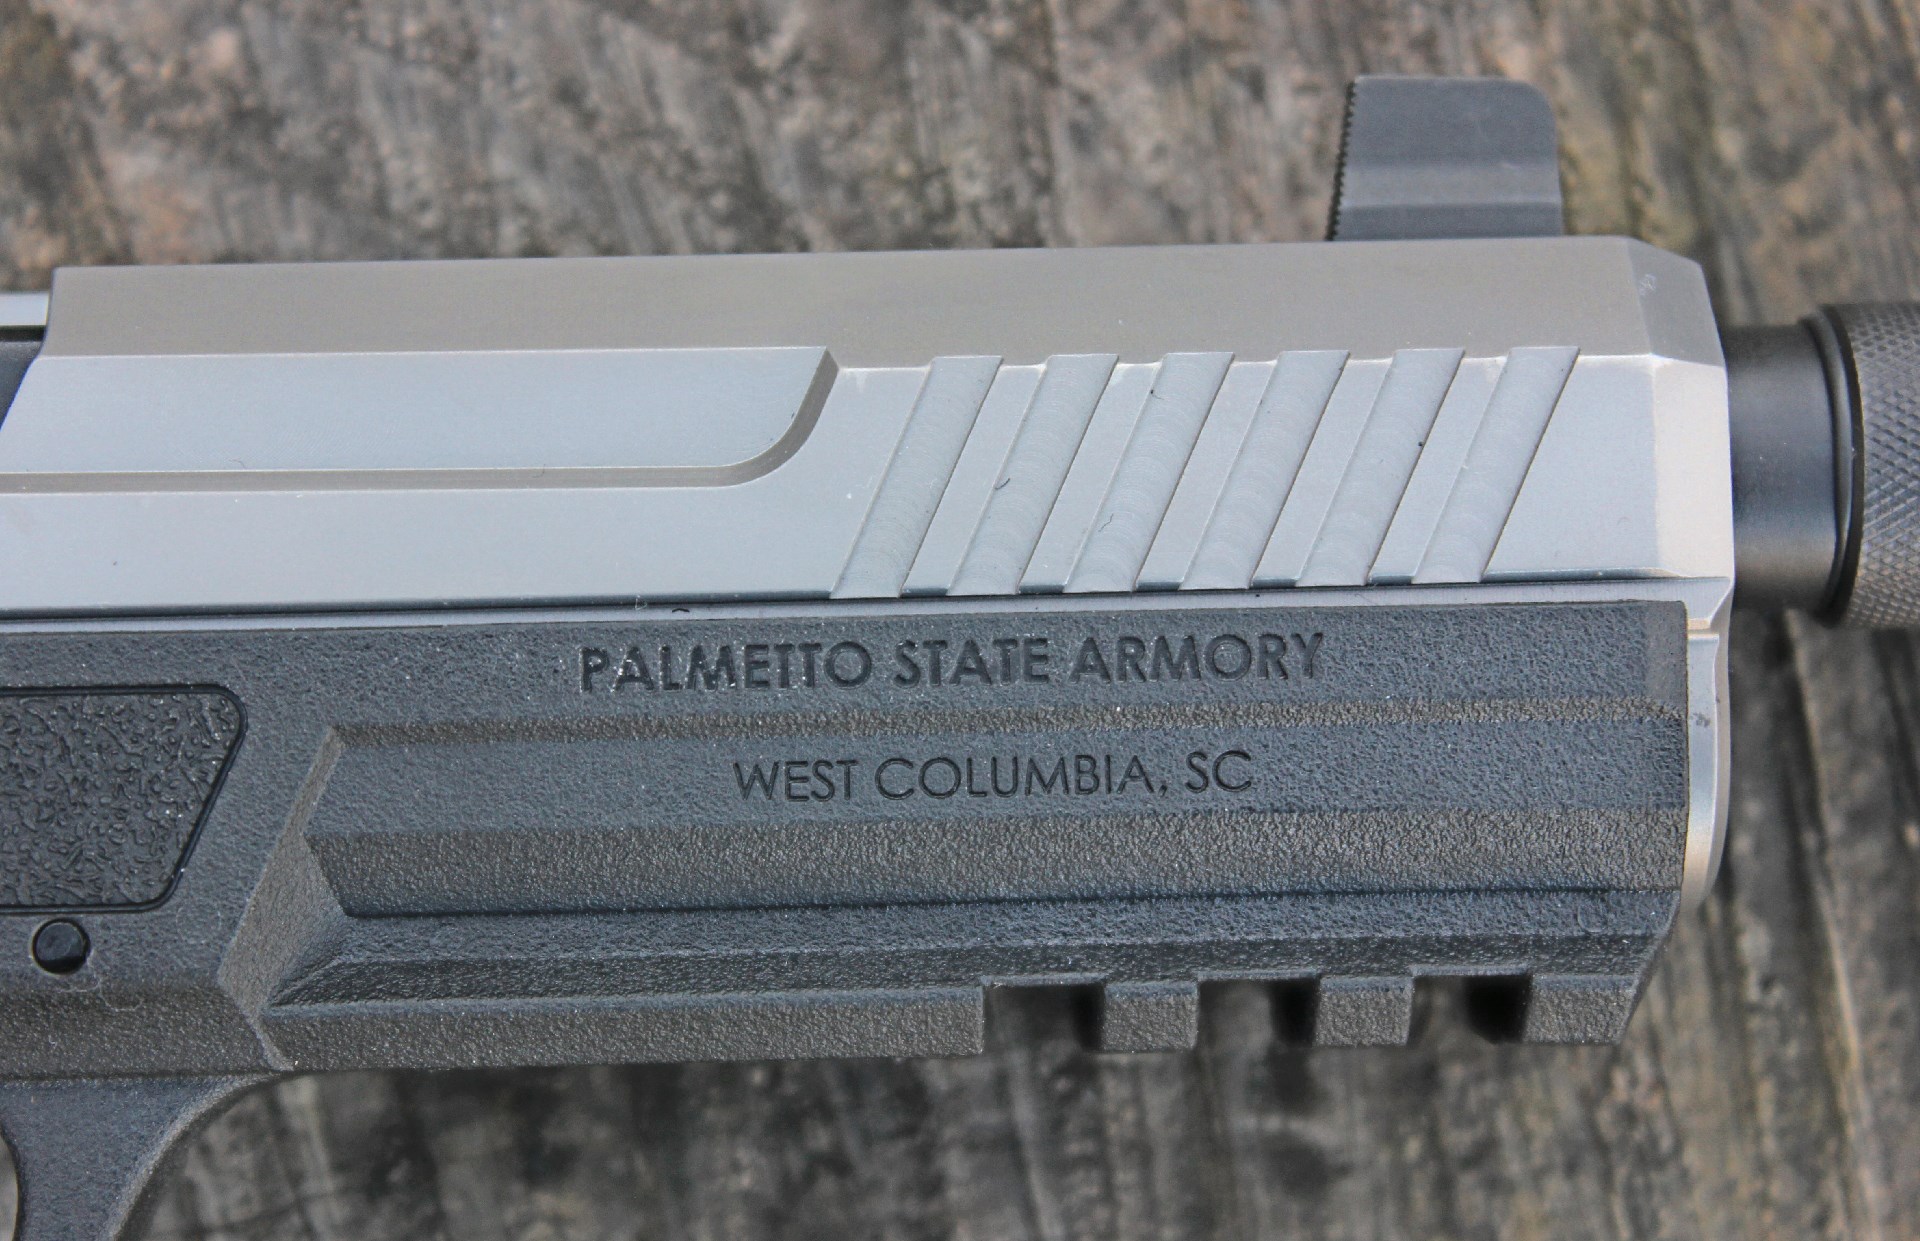 Palmetto State Armory West Columbia, SC stamping on gun frame two-tone stainless steel slide black ploymer